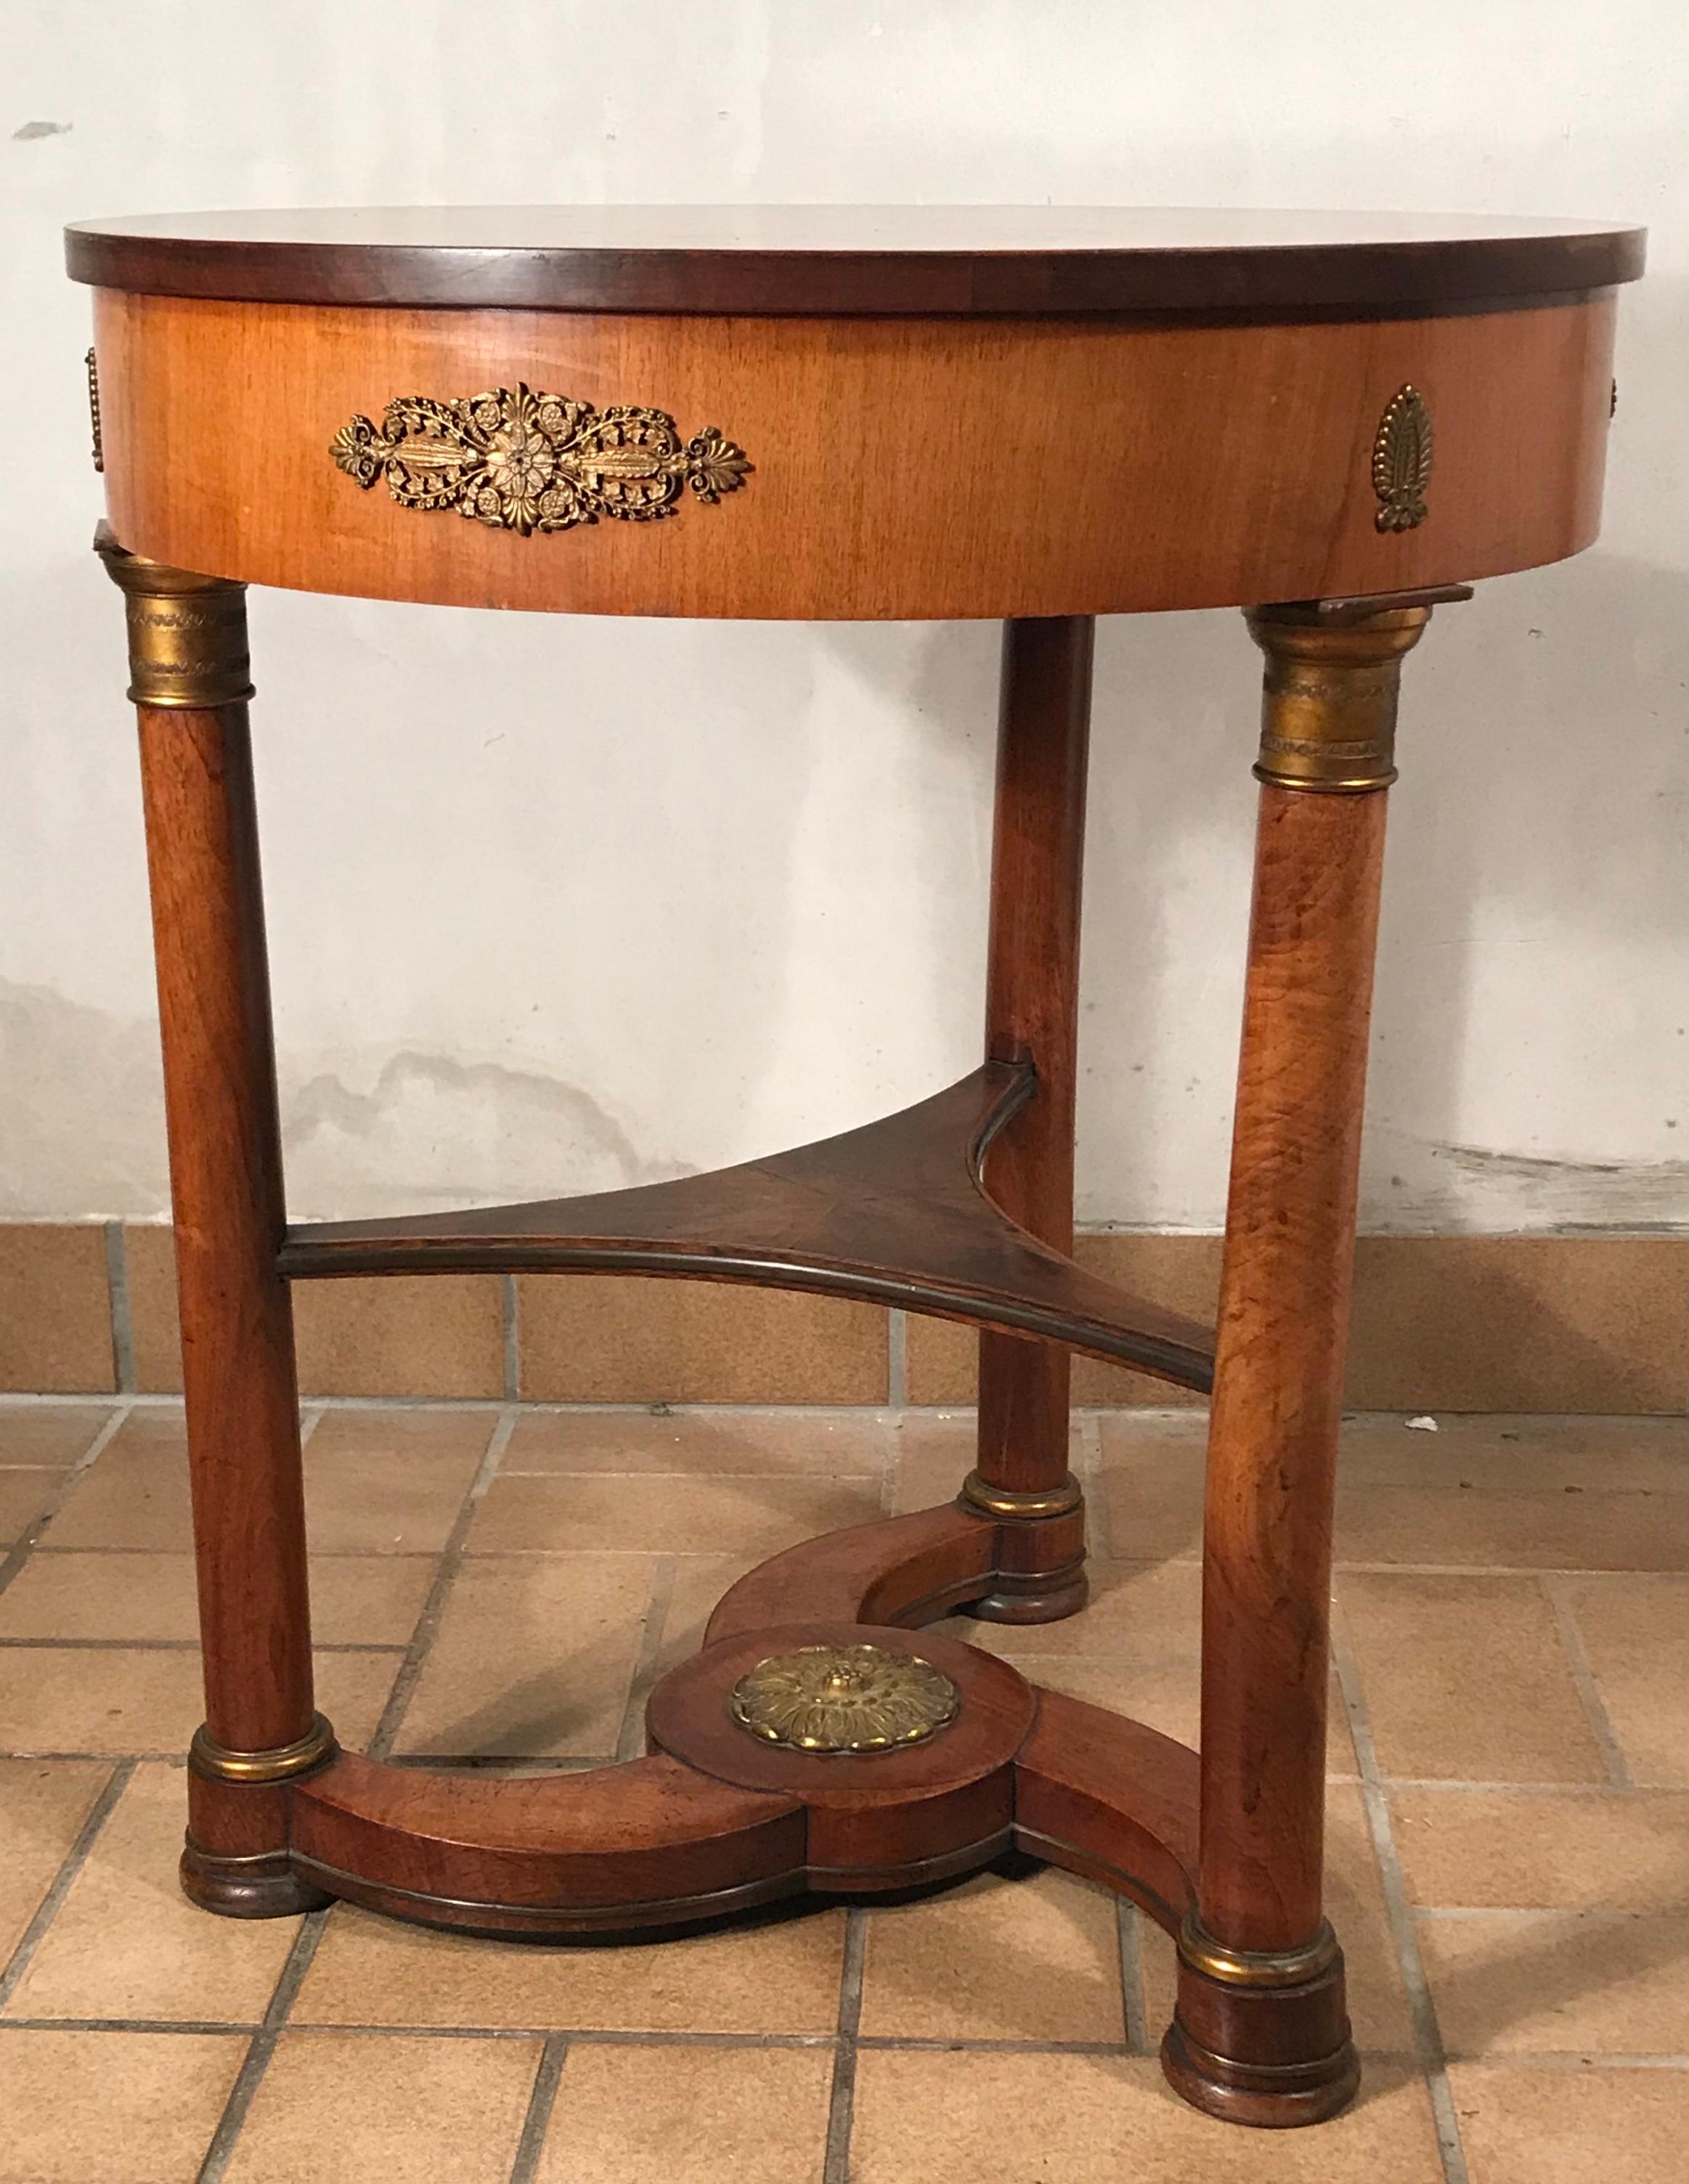 Empire side table, France 1810, mahogany veneer.
Beautiful side table with an exquisitely designed base. The table is in good original condition.